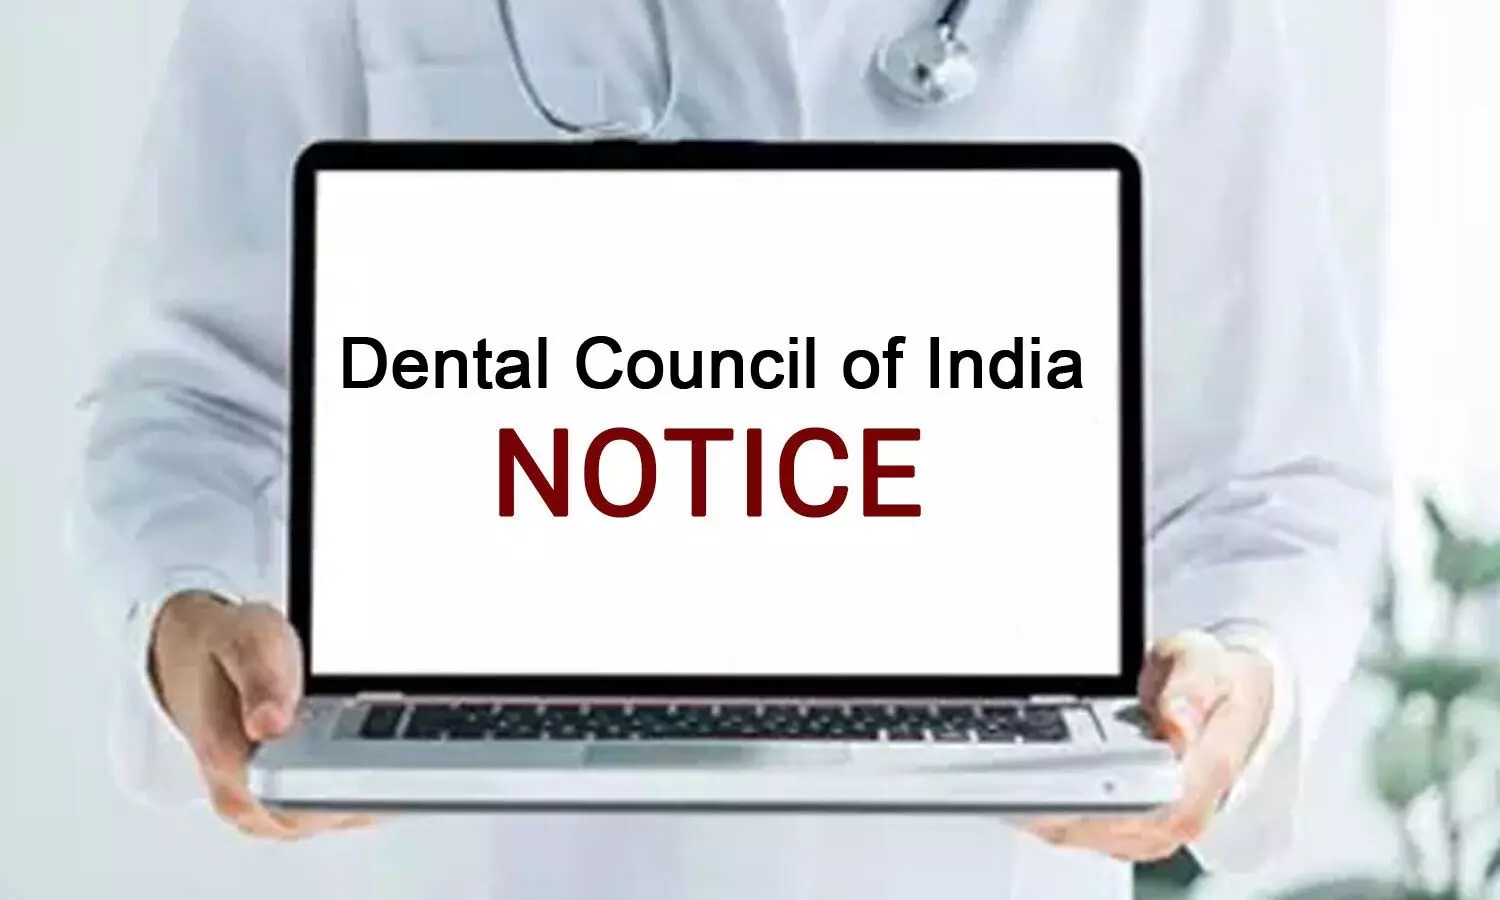 Beware of fraudulent calls from persons claiming to represent DCI President, Member: DCI Alert to dental colleges, state dental councils